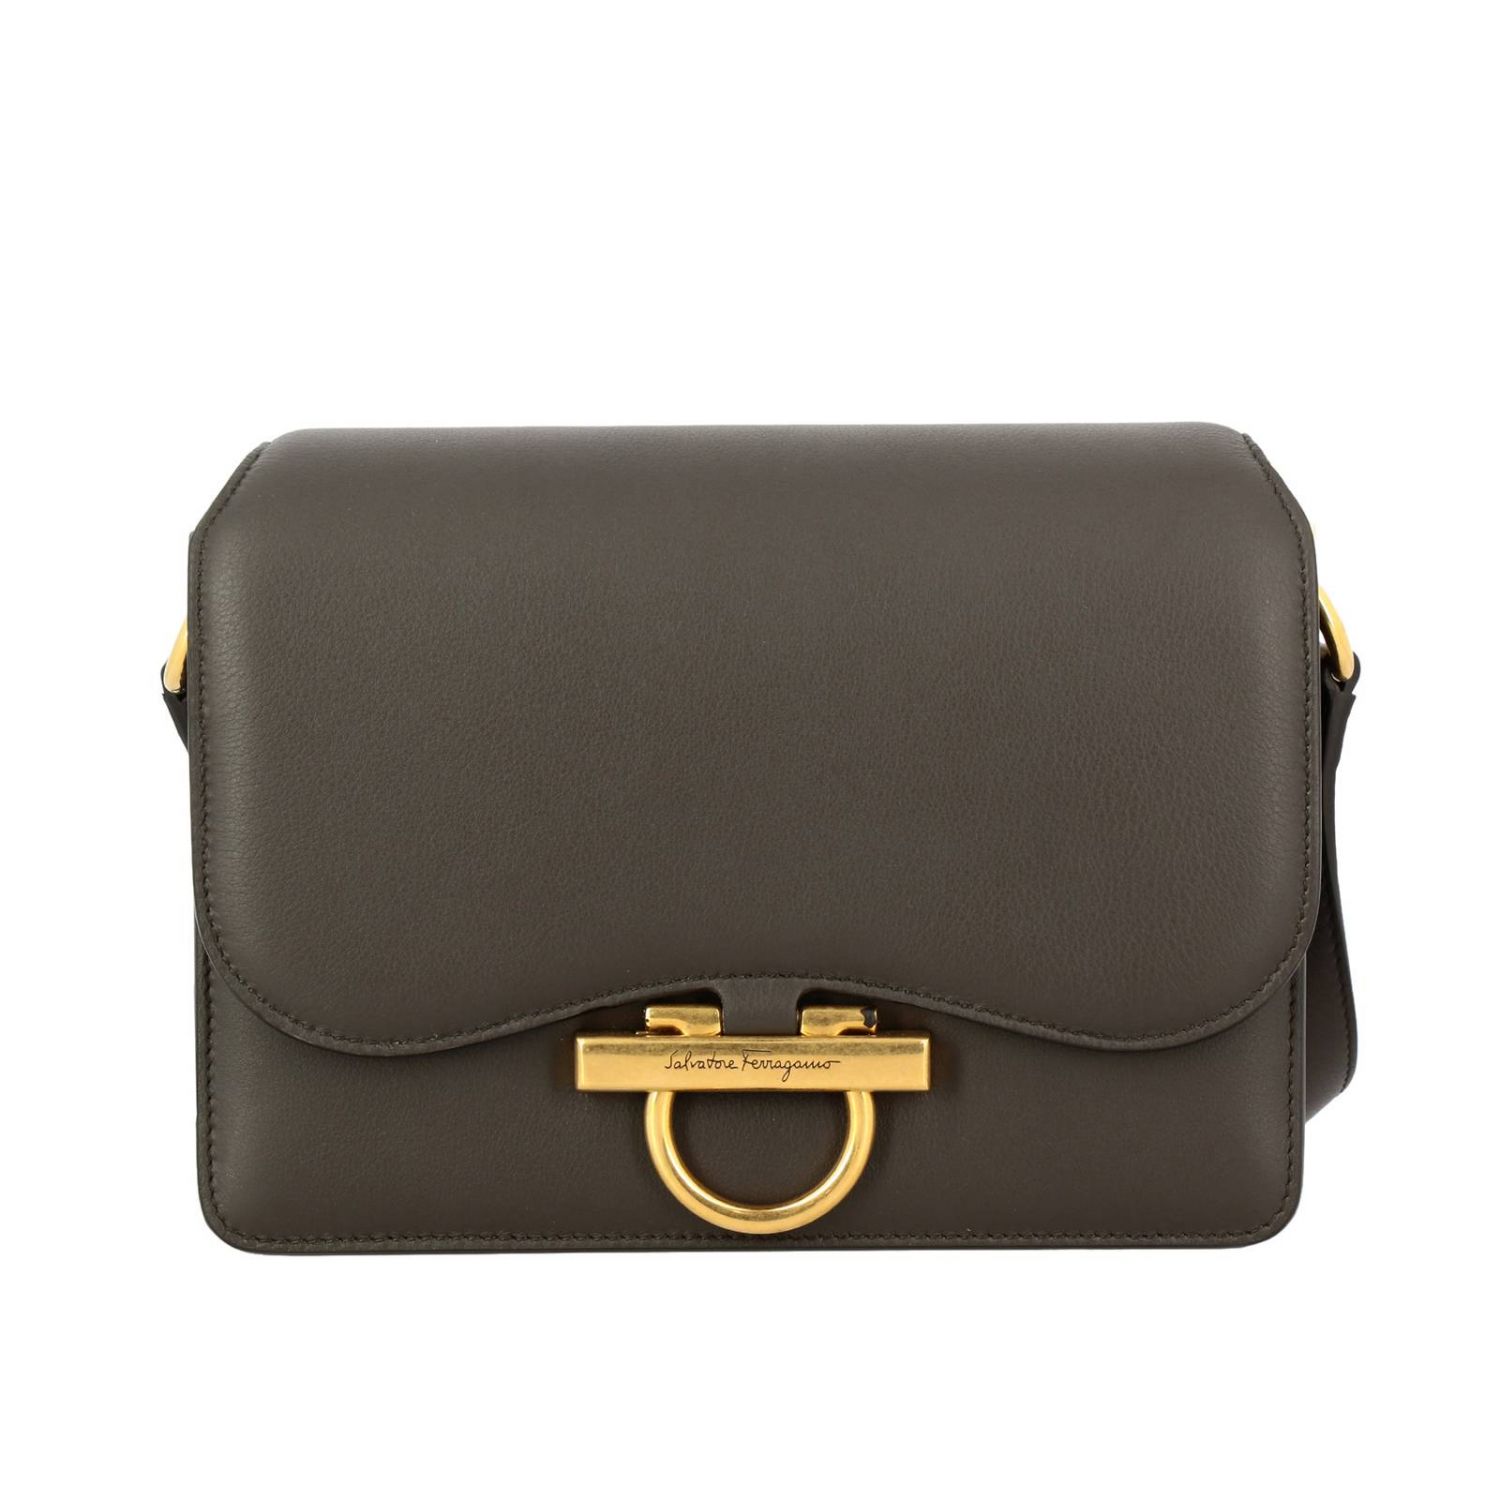 Salvatore Ferragamo Outlet: Classic Joanne bag in genuine leather with ...